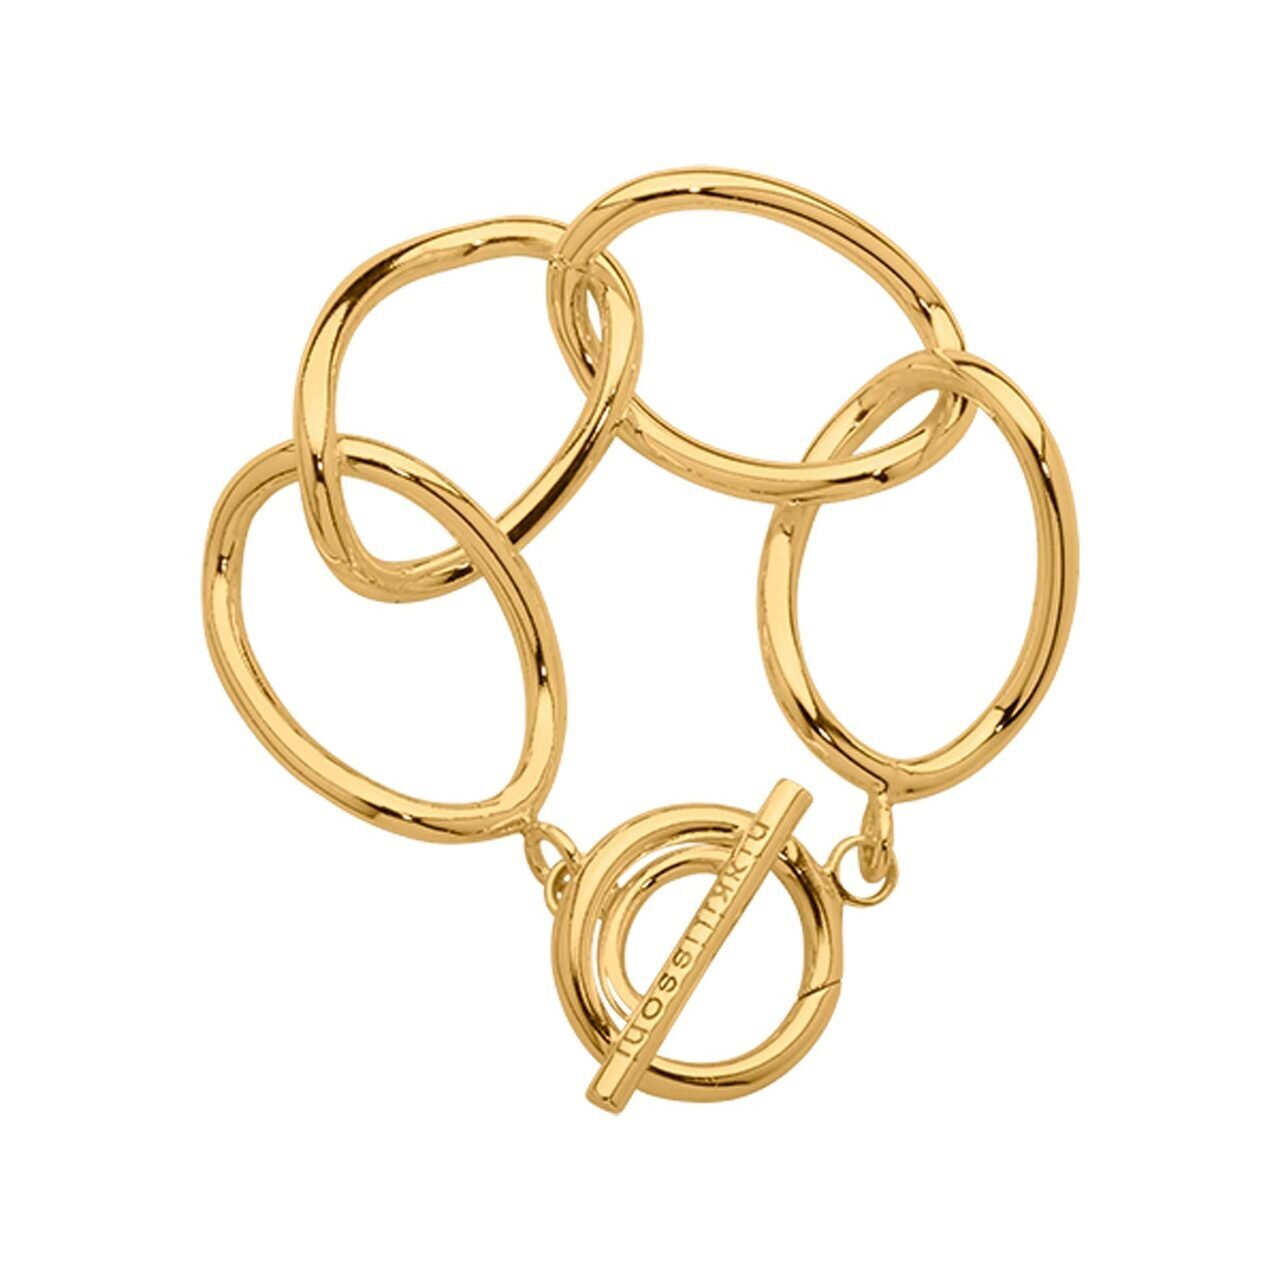 Nikki Lissoni Gold-plated Bracelet of 17cm with 4 Links of 27 x 37mm A T-Bar Closure B1132G17